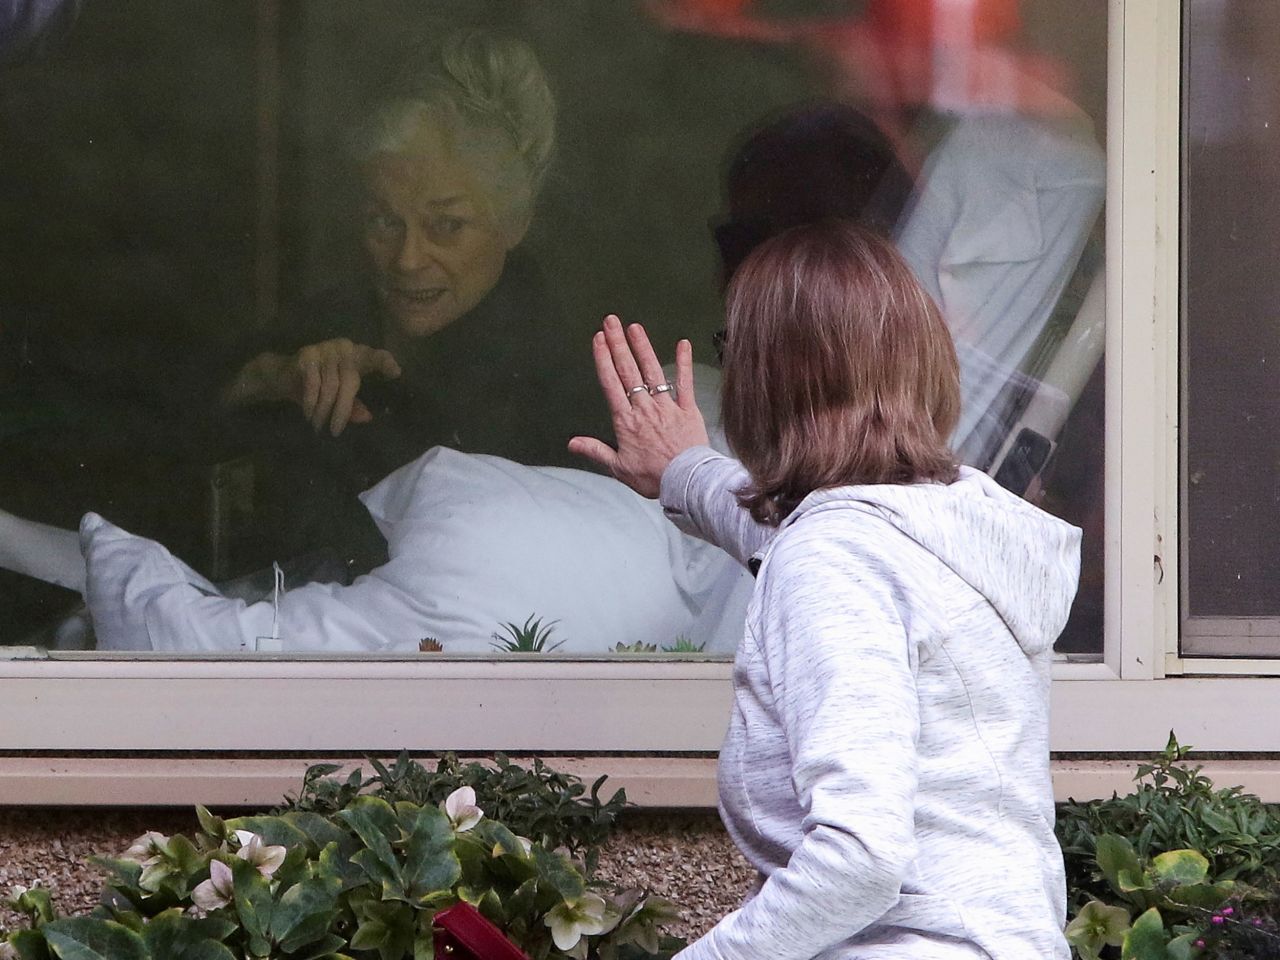 Lori Spencer visits her mother, 81-year-old Judie Shape, at the Life Care Center, a nursing home in Kirkland, Washington, in March 2020. The facility became an early epicenter of the pandemic in the US, and Shape was among those who tested positive. She has since recovered.